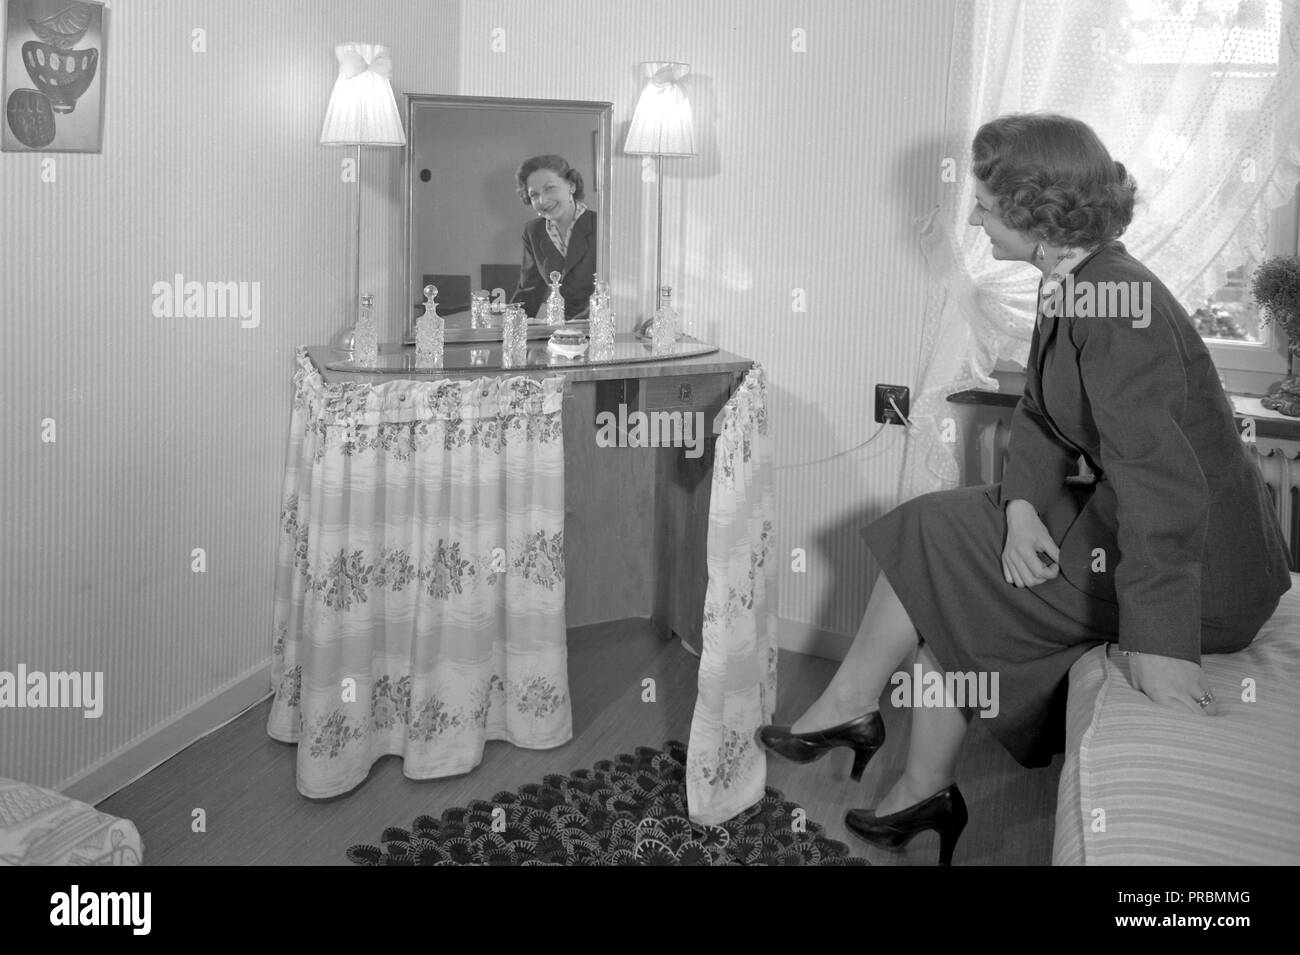 1950s women at home. A woman in her bedroom at home showing the makeup table. A furniture designed to be functional for makeup and hairstyling.  Sweden 1954.  Ref 2797 Stock Photo